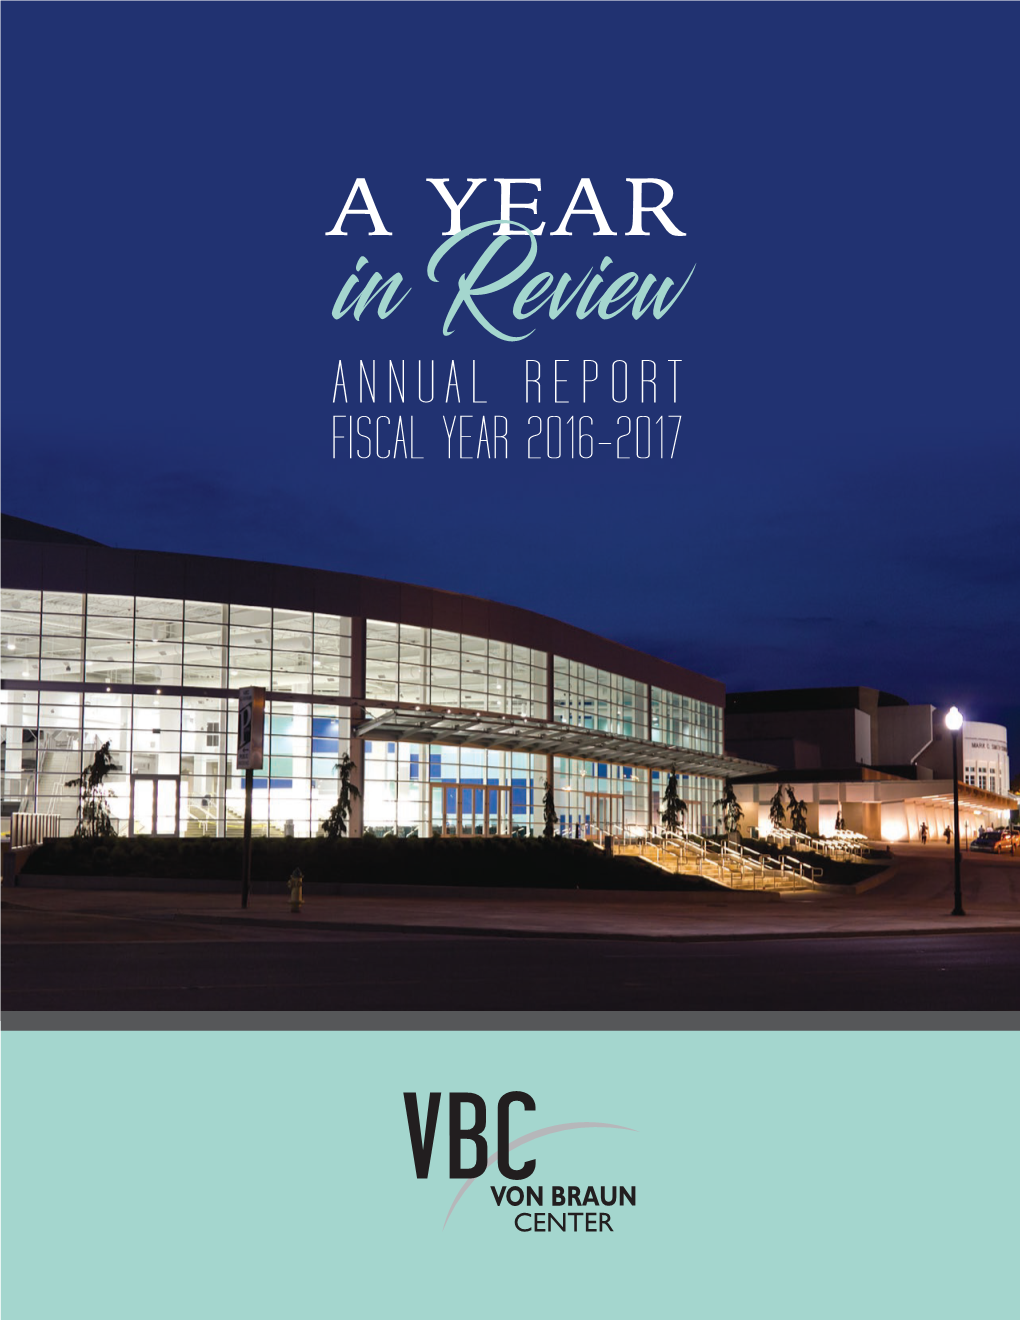 A YEAR in Review ANNUAL REPORT FISCAL YEAR 2016-2017